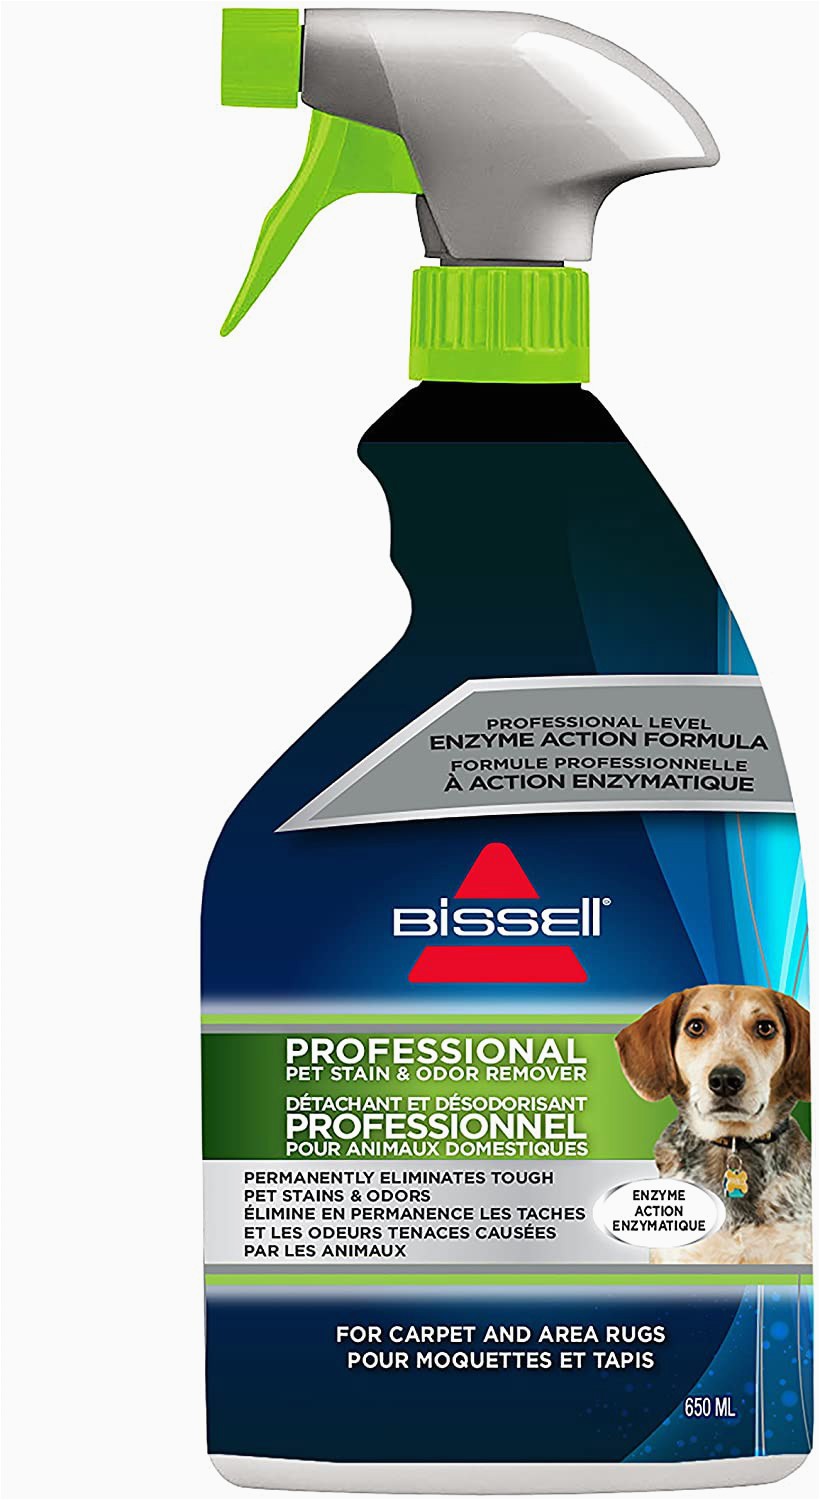 Bissell Pro Carpet and area Rug Stain Remover Bissell Professional Stain and Odor Carpet and Upholstery